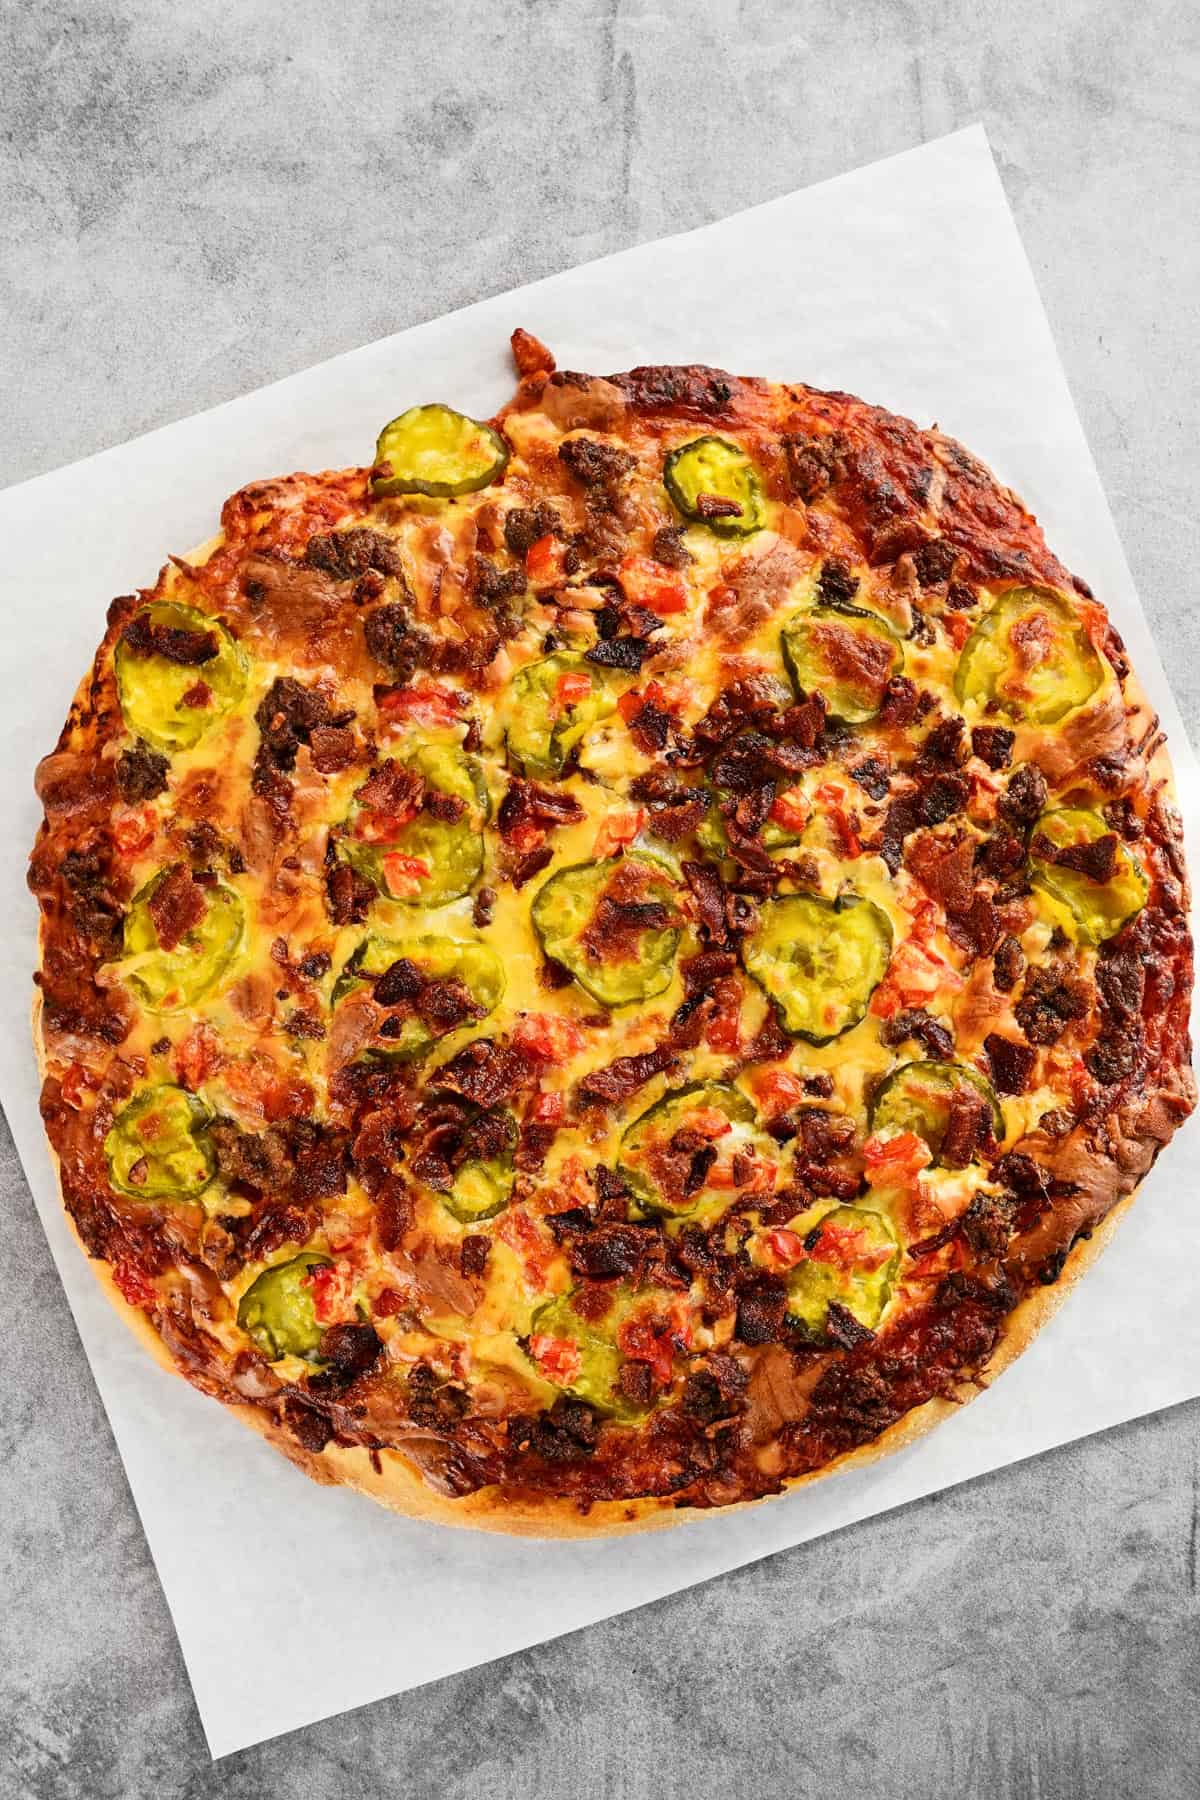 A cooked pizza with meat and vegetables on top.